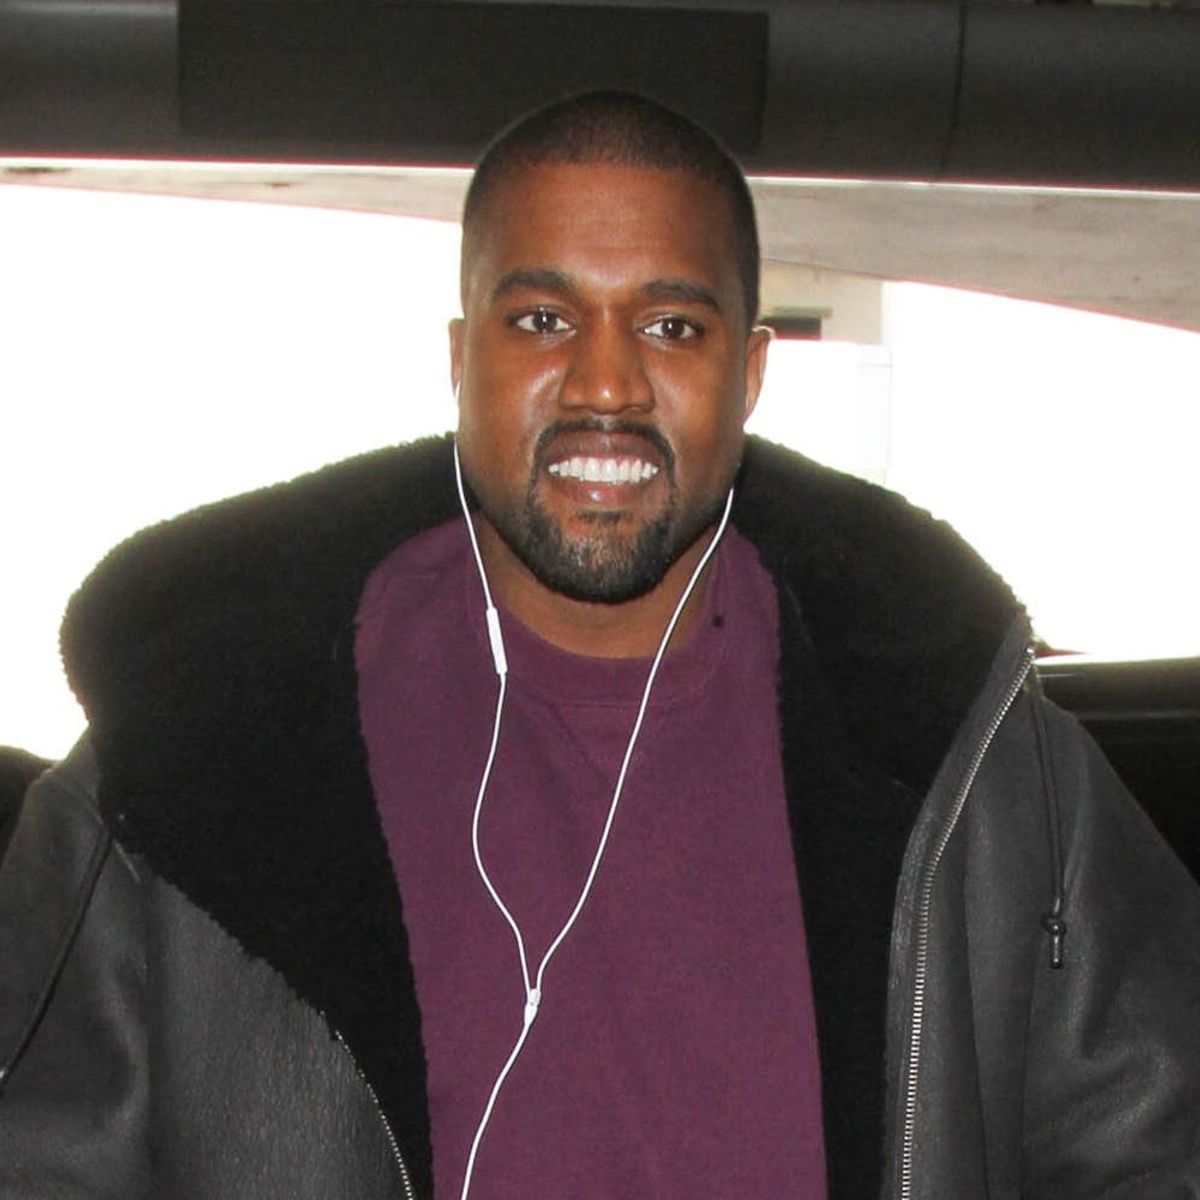 You’ll Be Shocked by Kanye’s New Look